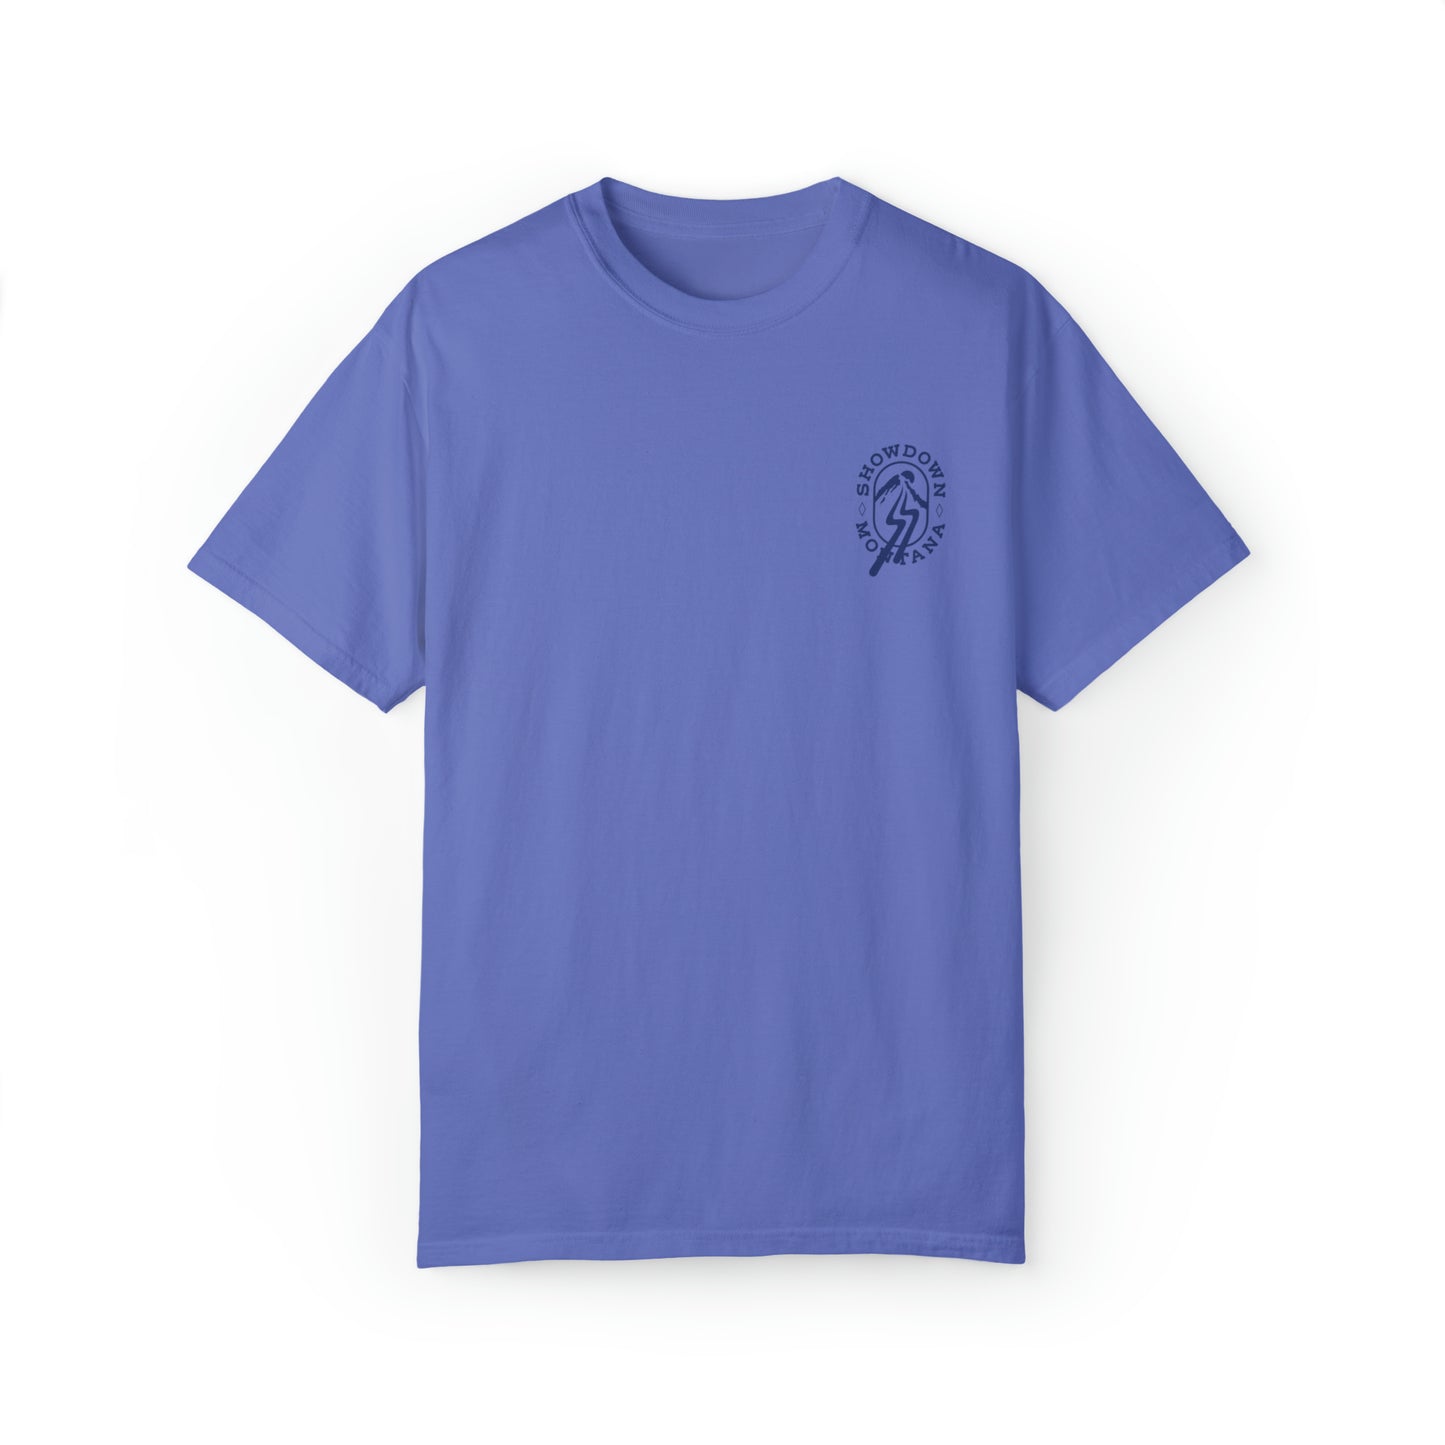 The Most Fun You Can Have Garment-Dyed T-shirt – Showdown Swag Shop